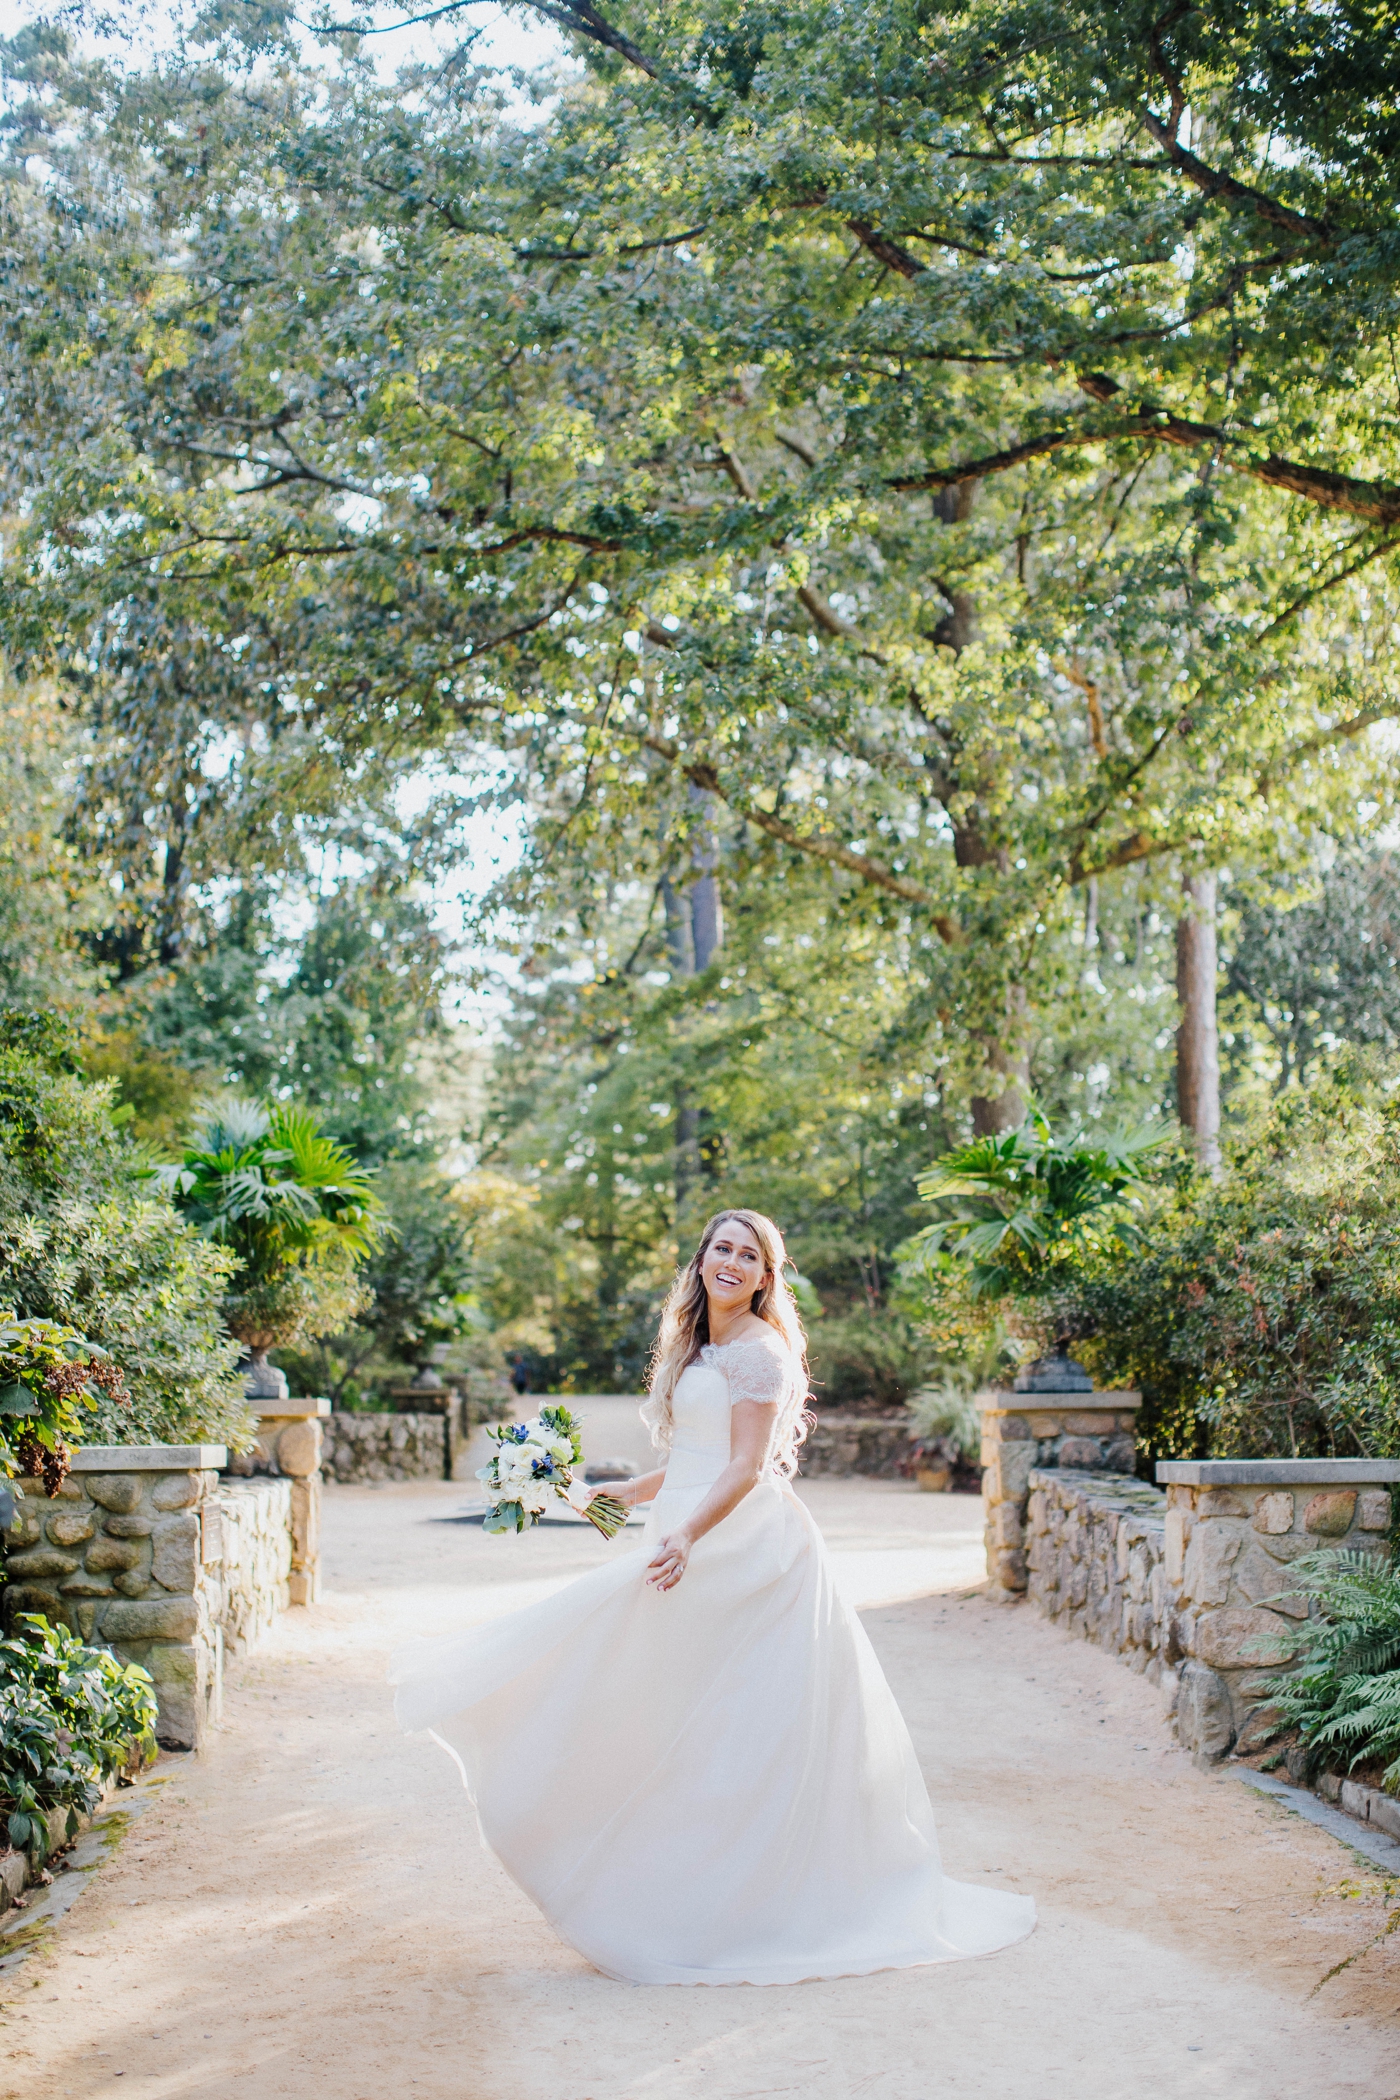 Bride in a custom satin and lace wedding ballgown